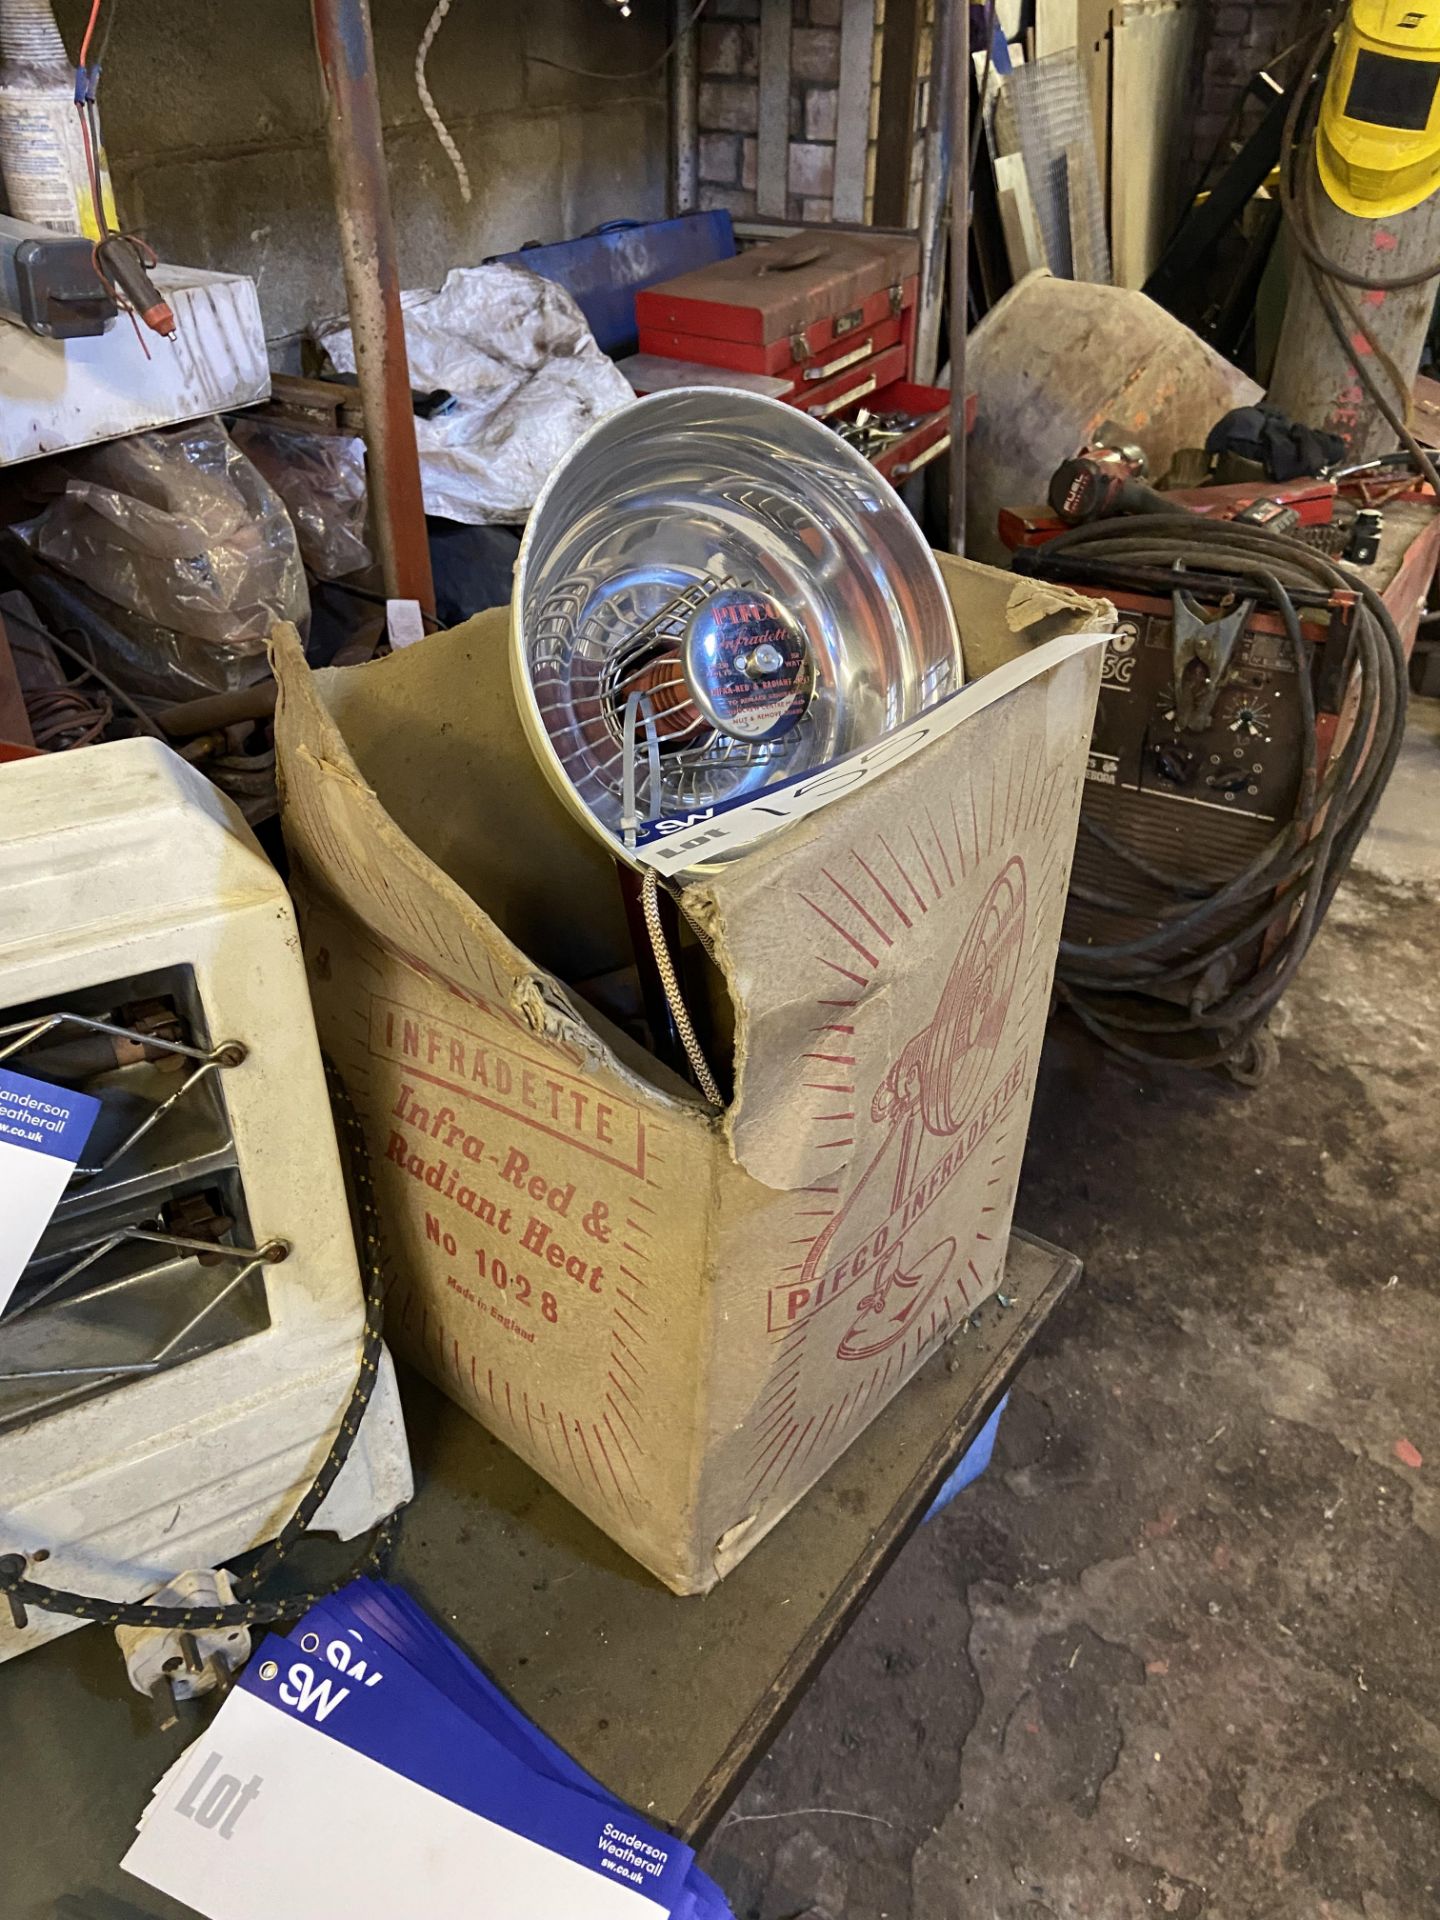 Pifco Infradette Infrared & Radiant Heat Lamp, in original box, circa 1940 (please note - this lot